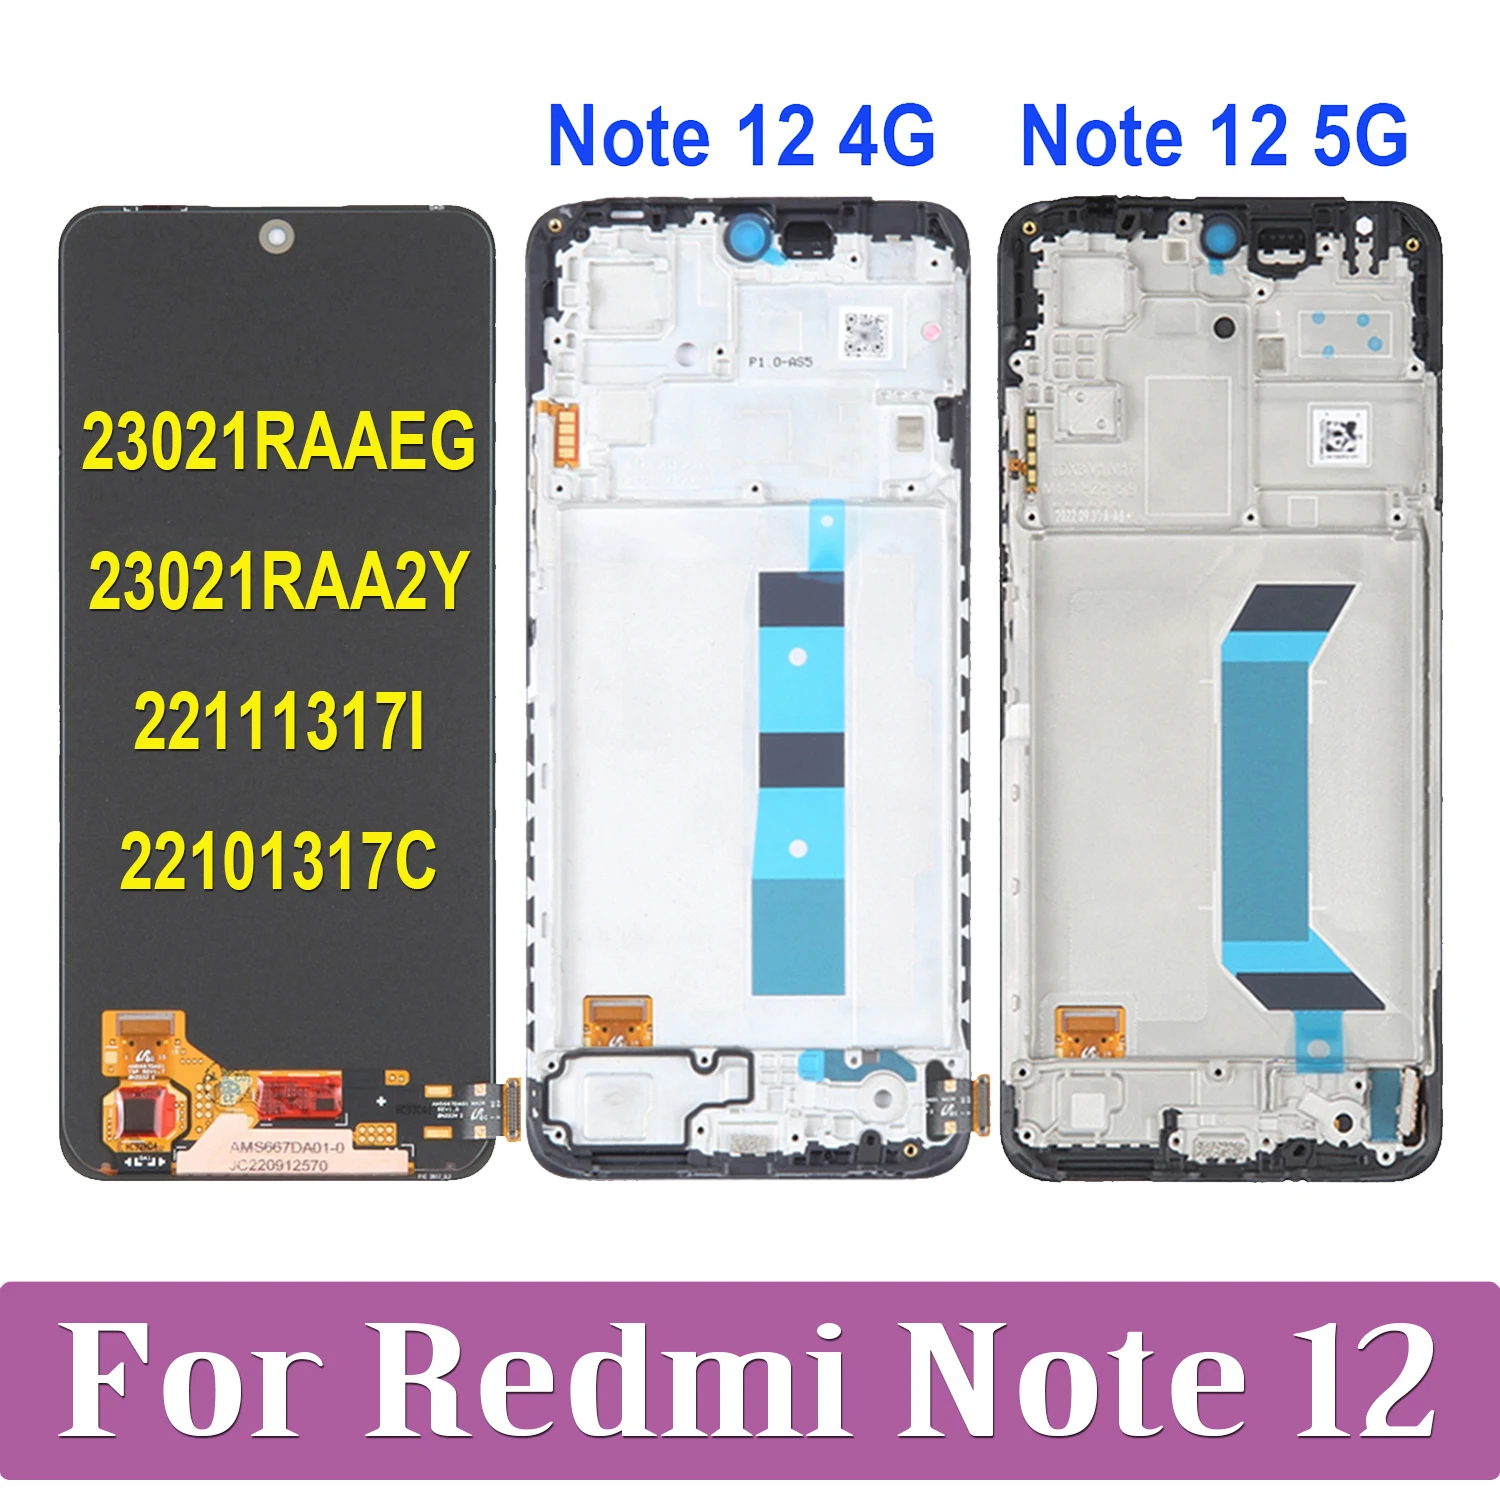 https://ae01.alicdn.com/kf/S26b260587aa04a7f9edeaf3d492b40fb7/Original-AMOLED-For-Xiaomi-Redmi-Note-12-Note12-4G-5G-22111317I-22101317C-23021RAAEG-LCD-Display-Touch.jpg